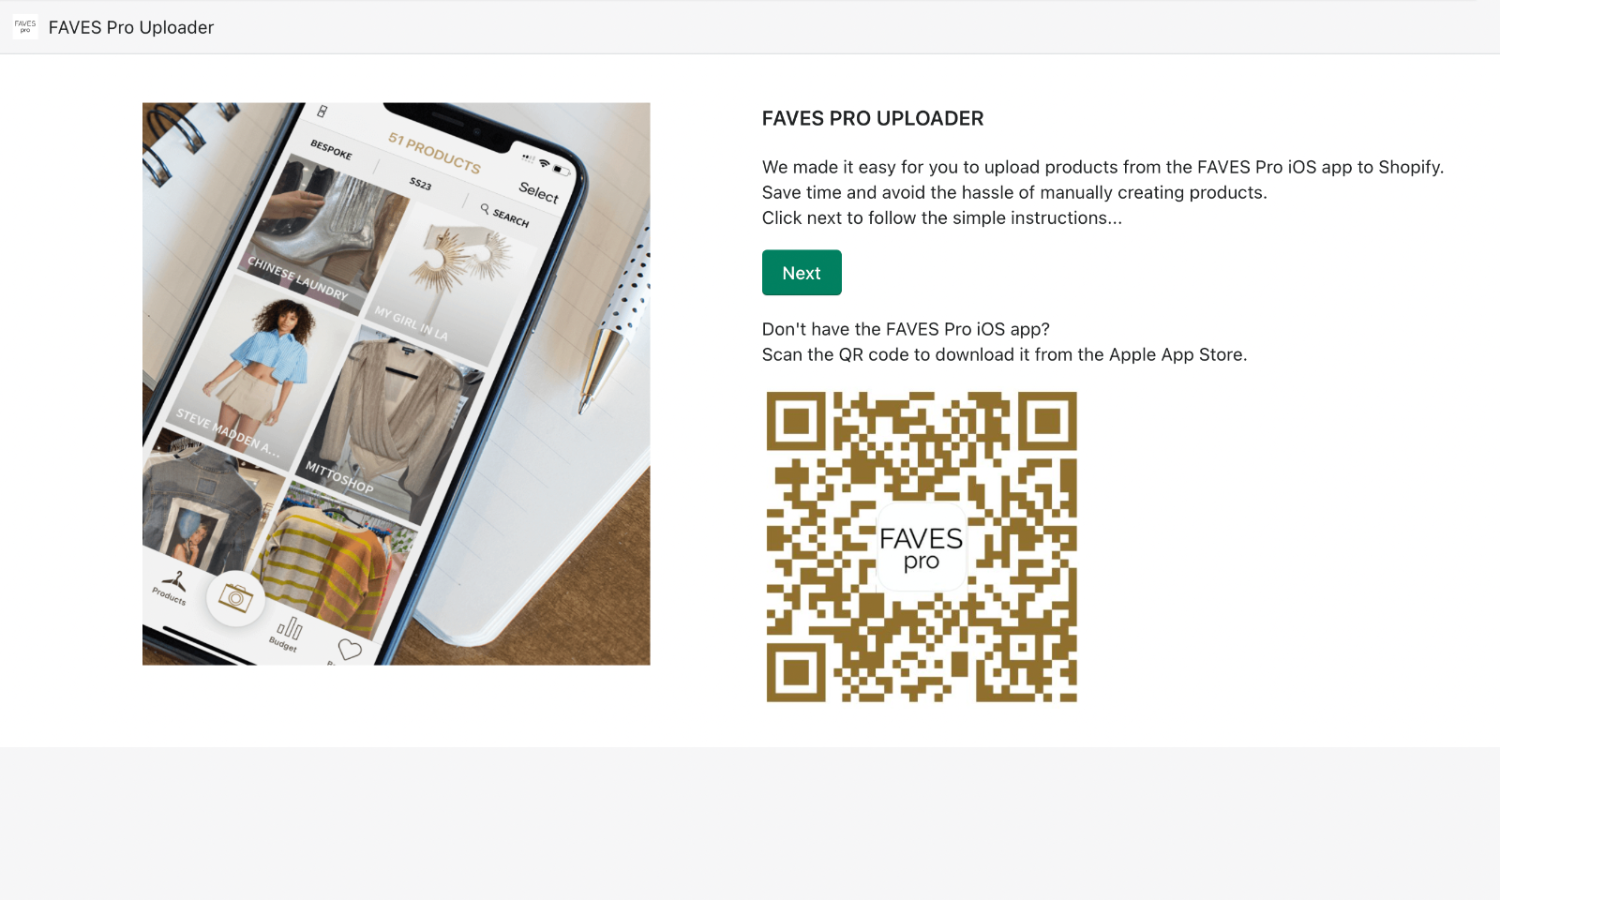 Image showing the FAVES Pro iOS app and a QR code